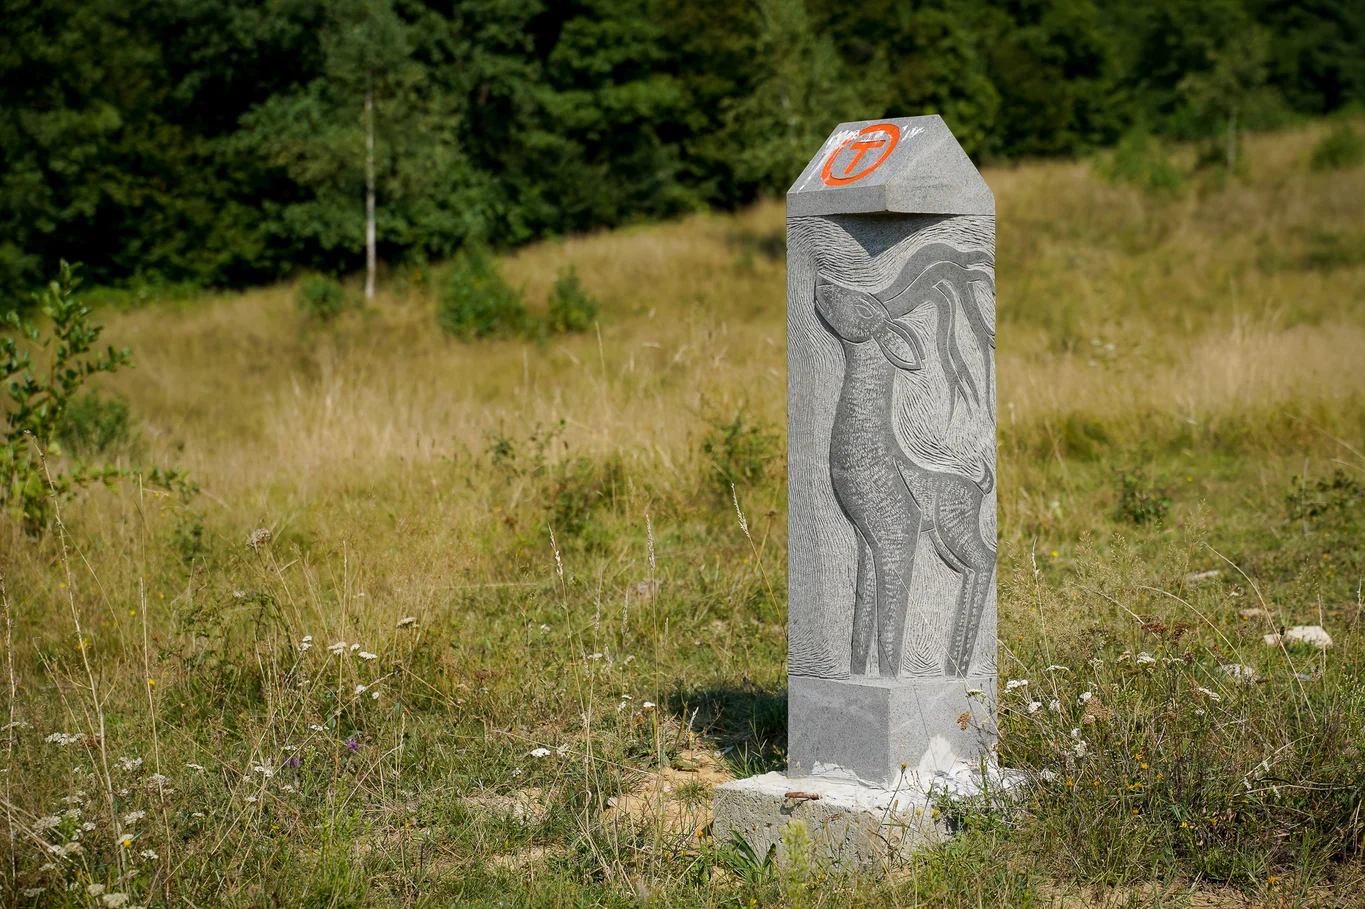 One of the andesites bollards that mark the Via Transilvanica trail, representing a stag.